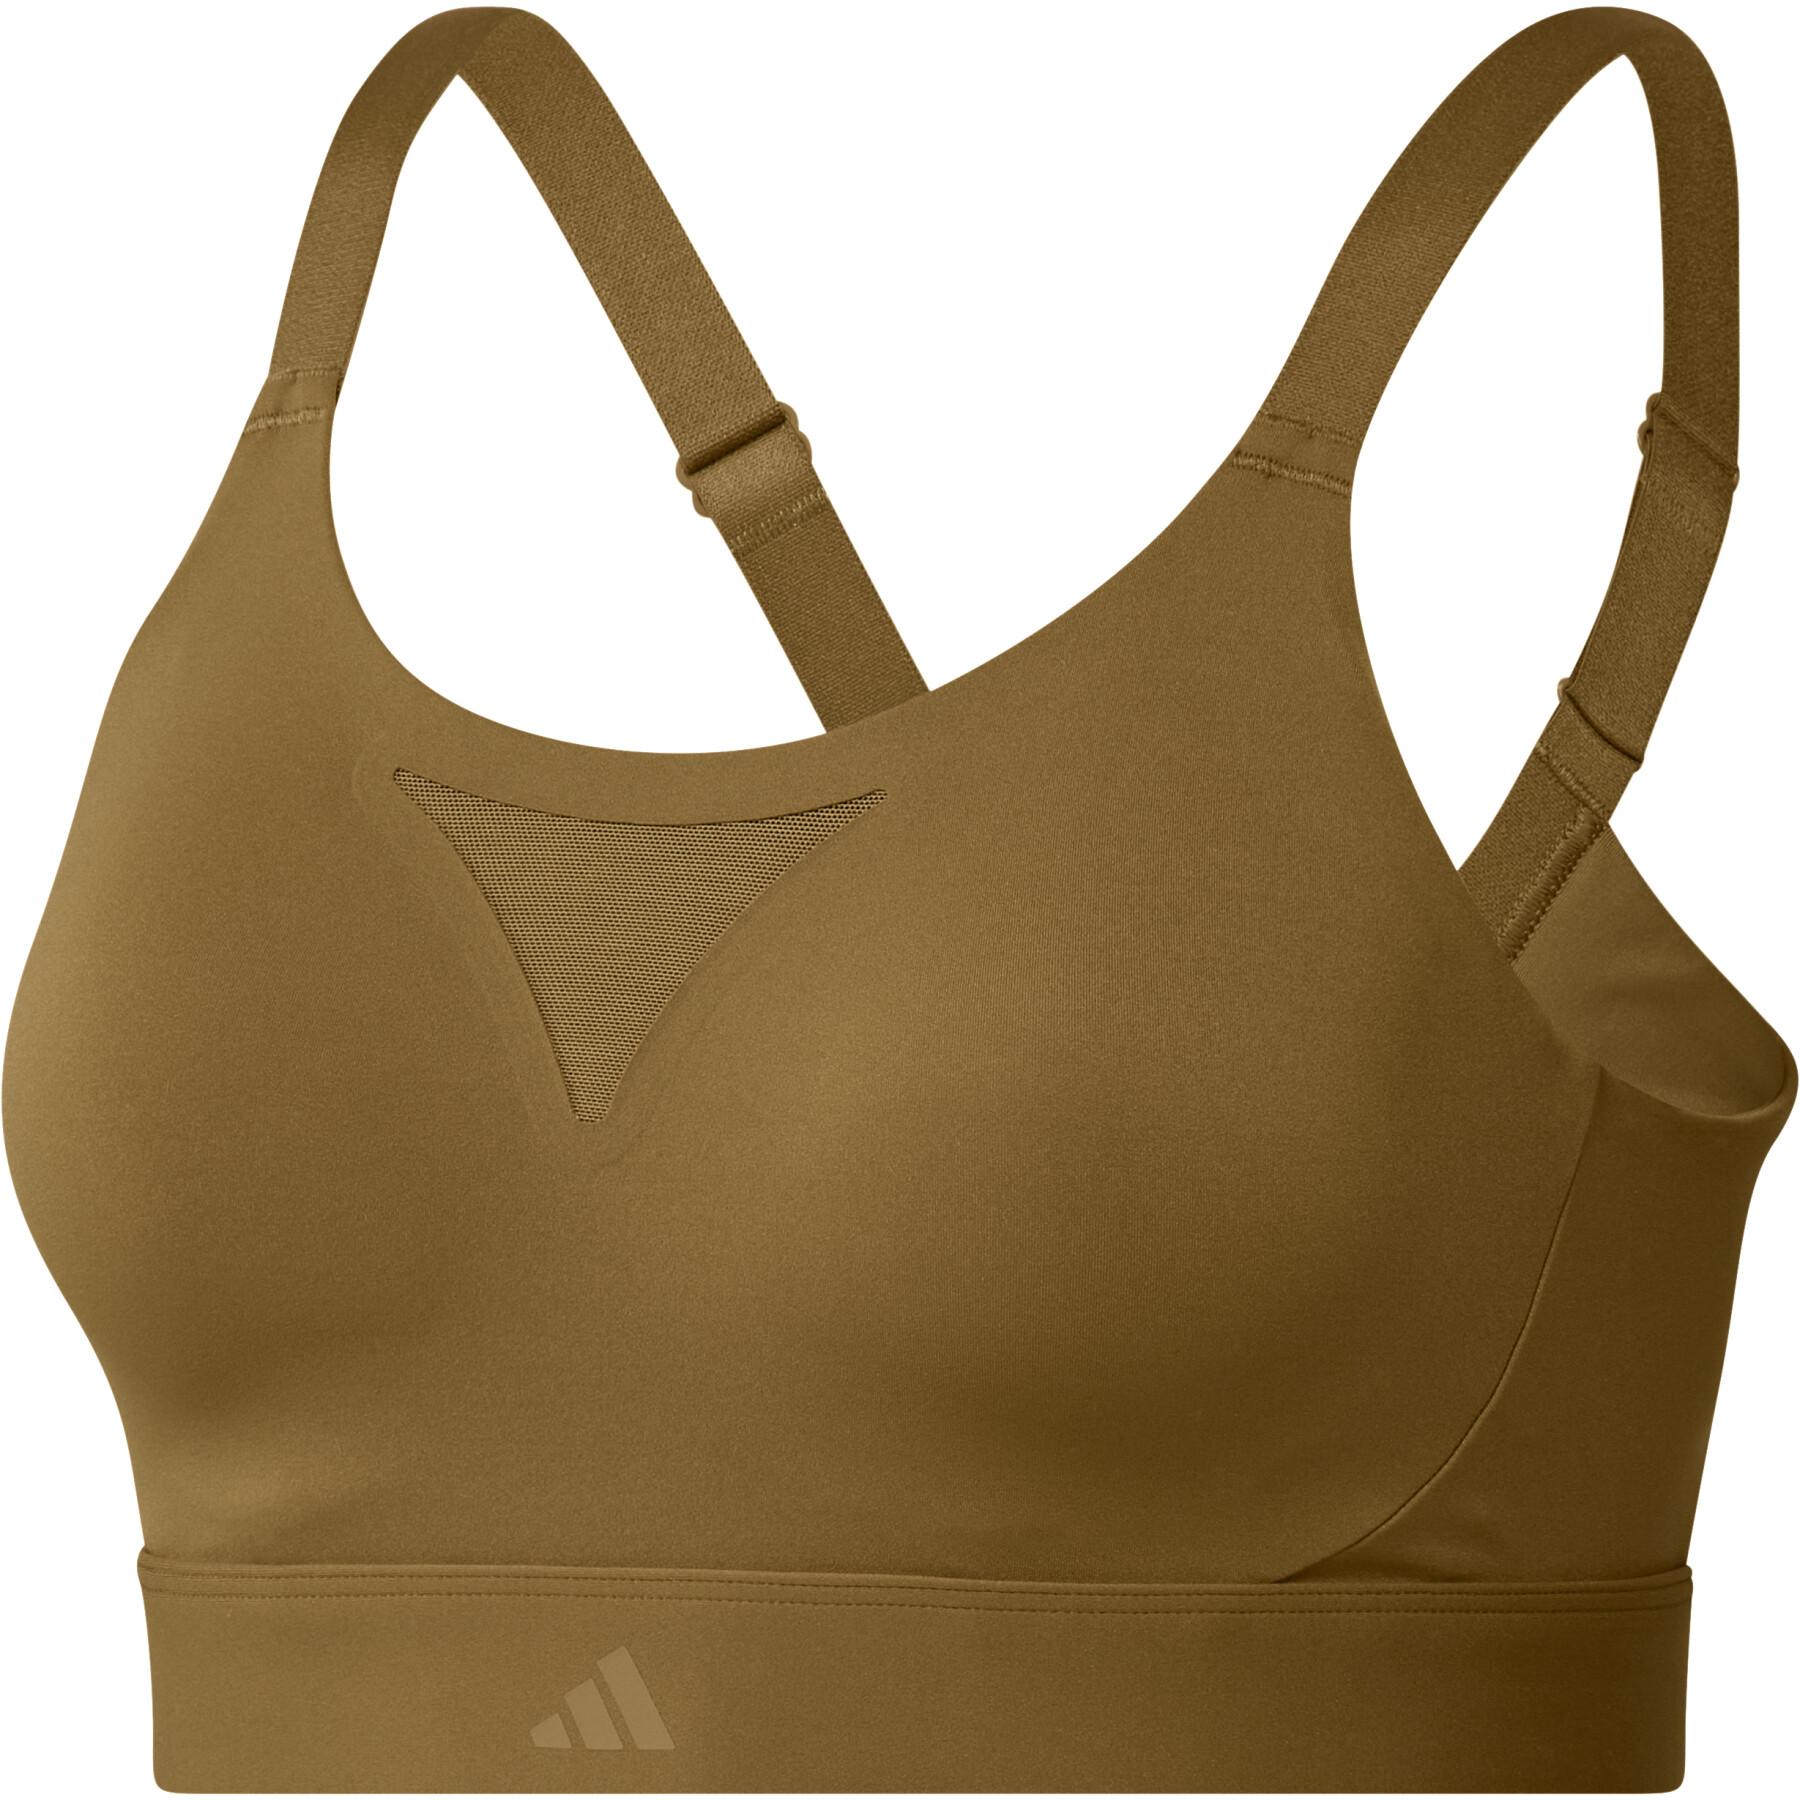 High support bra made to measure for women adidas Impact